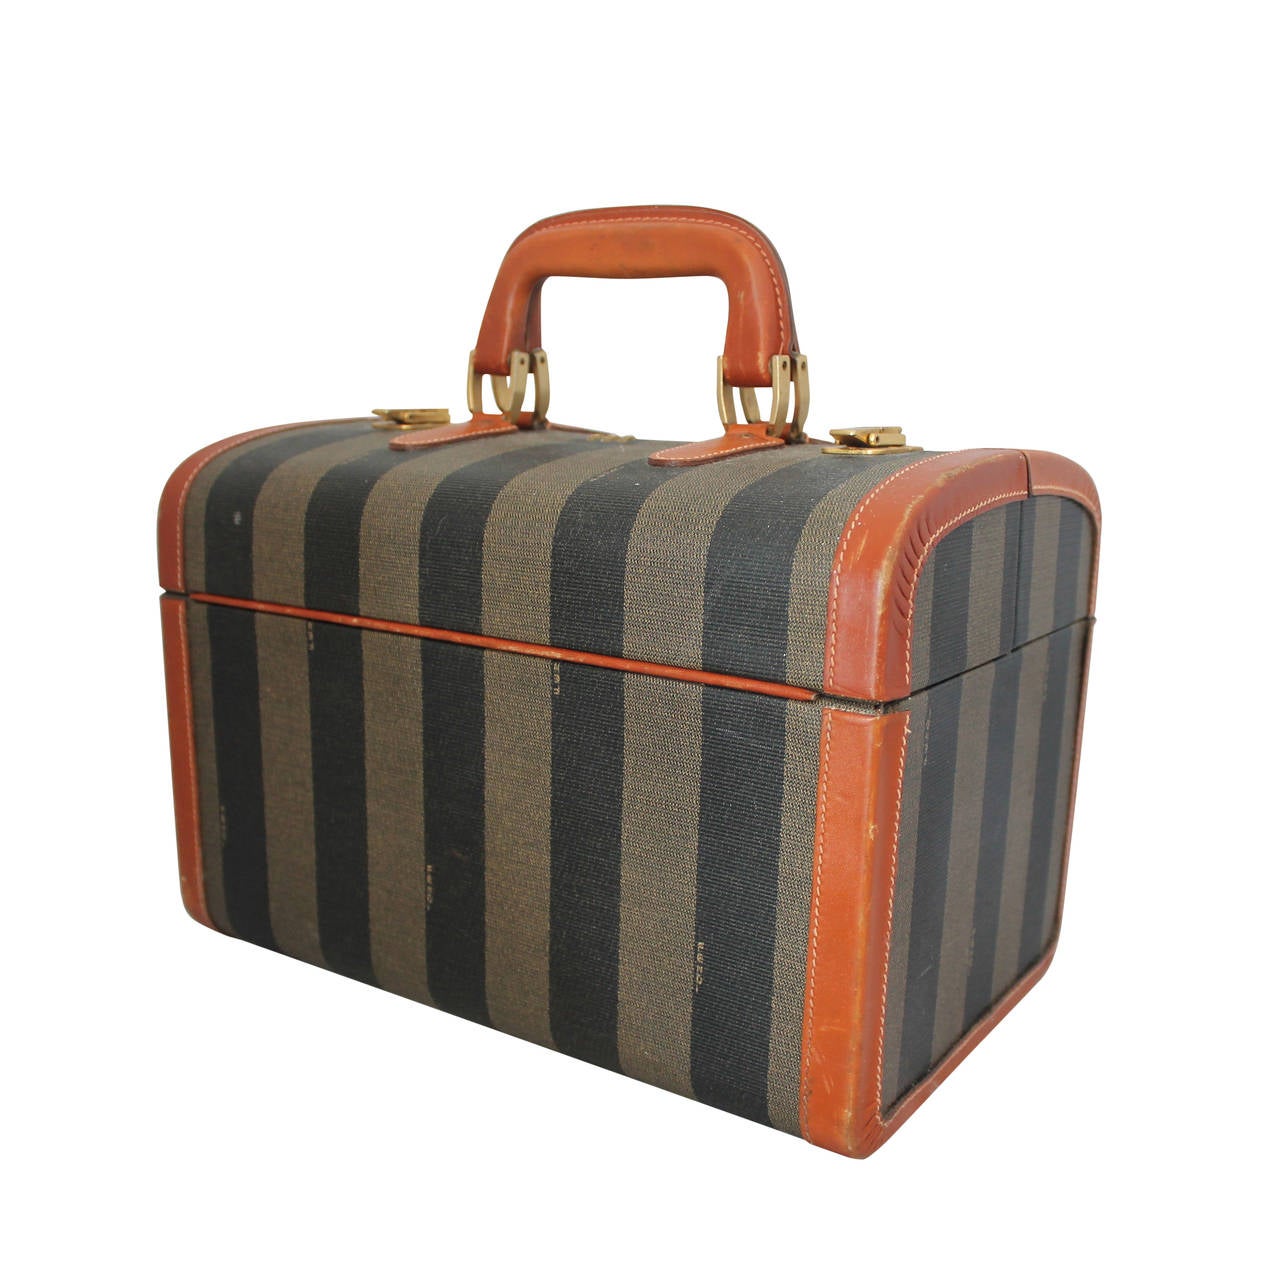 Fendi 1980's Vintage Olive & Black Striped Small Trunk with Brown Leather